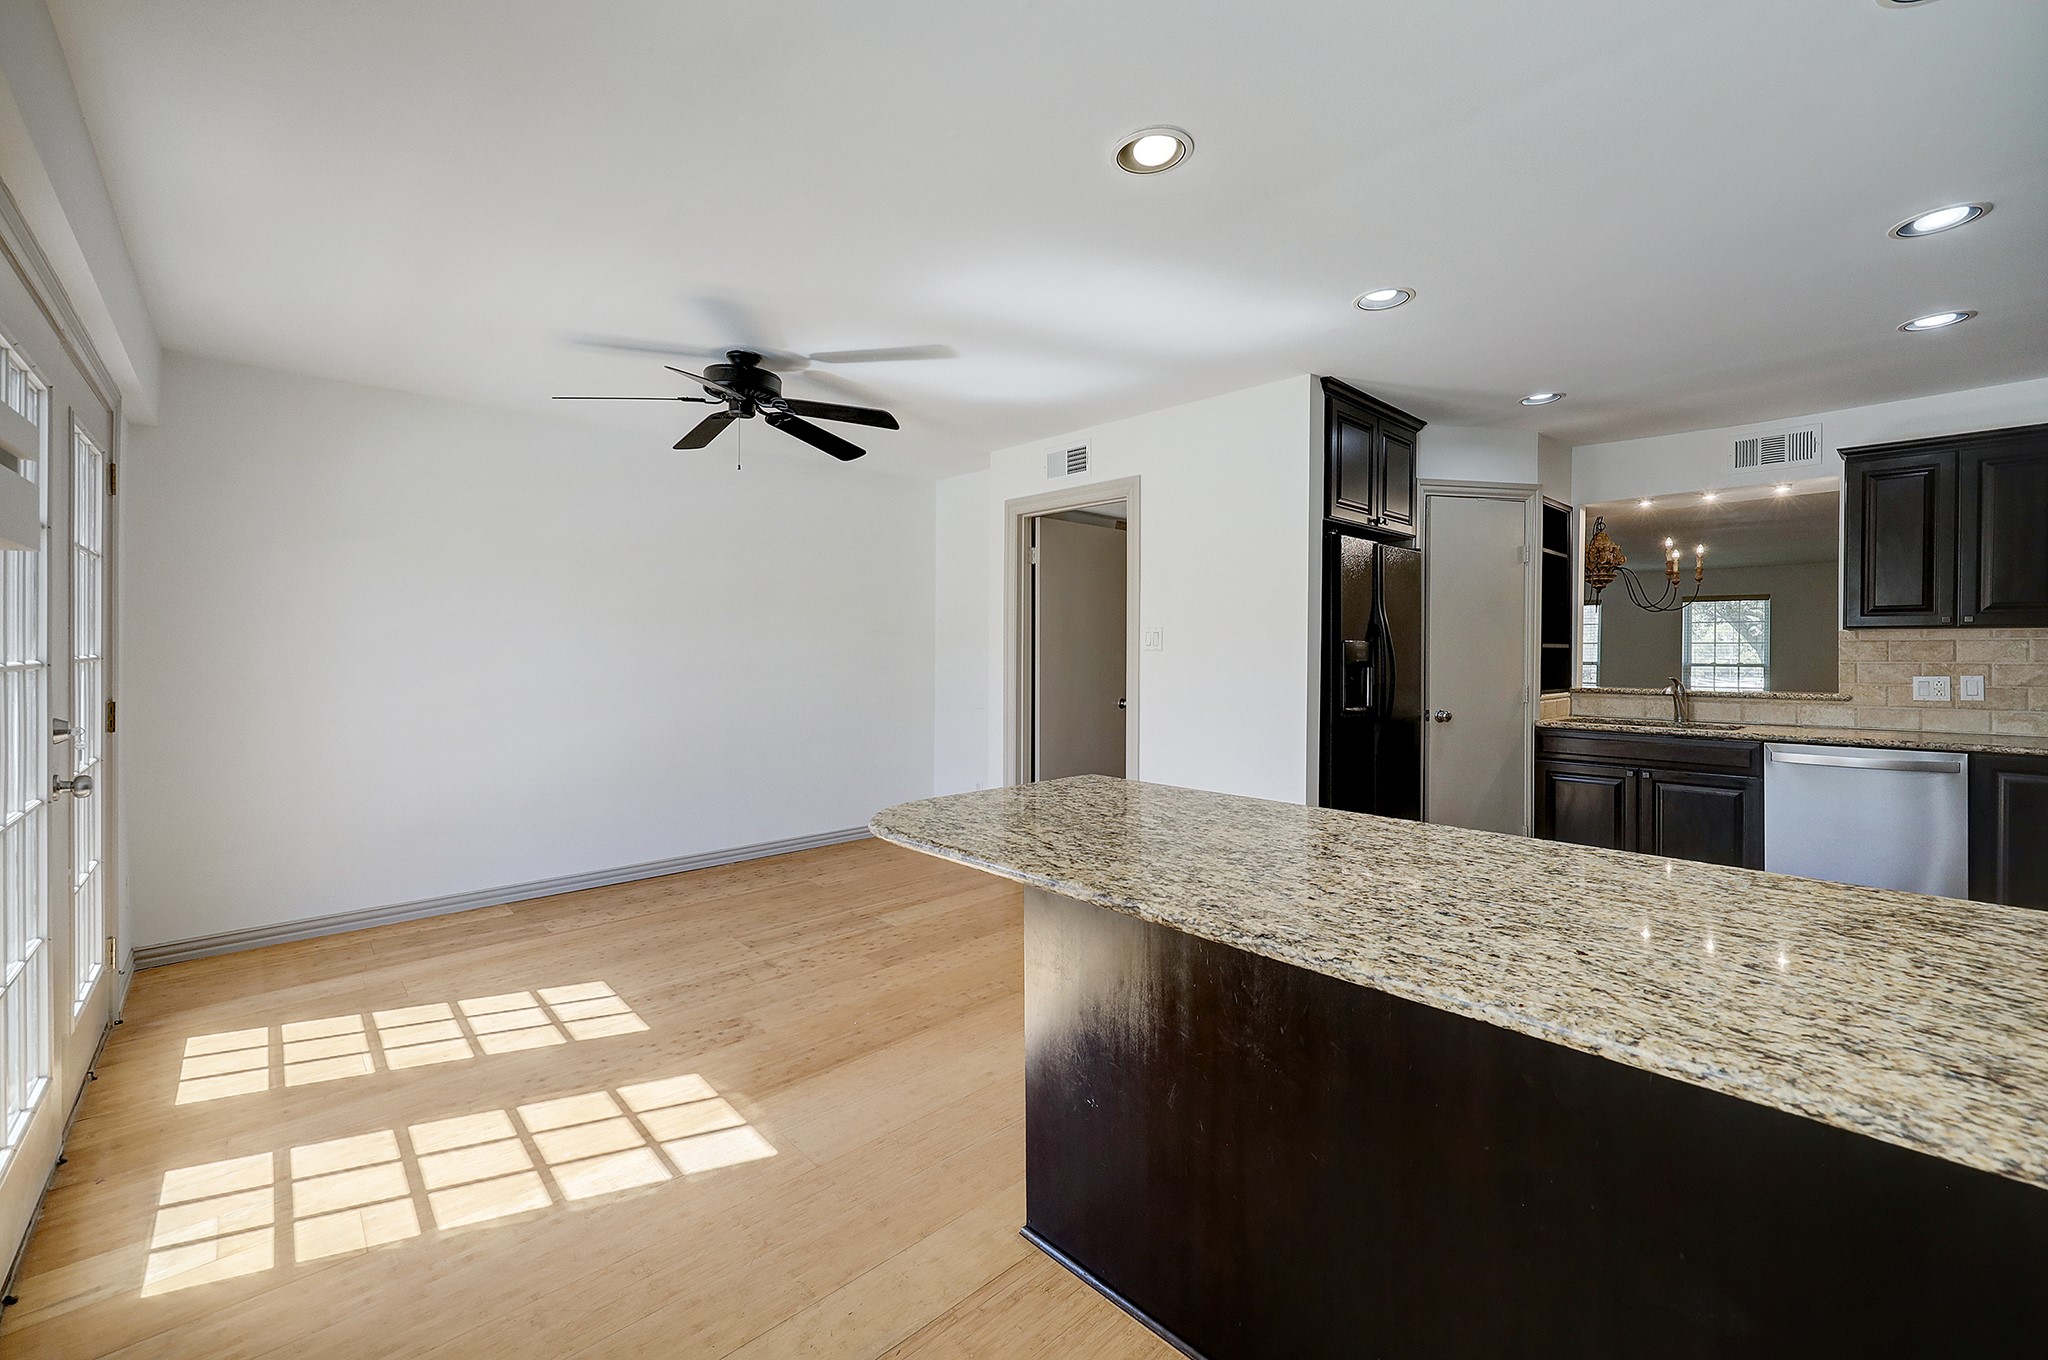 Alternate view of the back entrance, and sizable breakfast room. A well-placed ceiling fan allows for easy air flow.